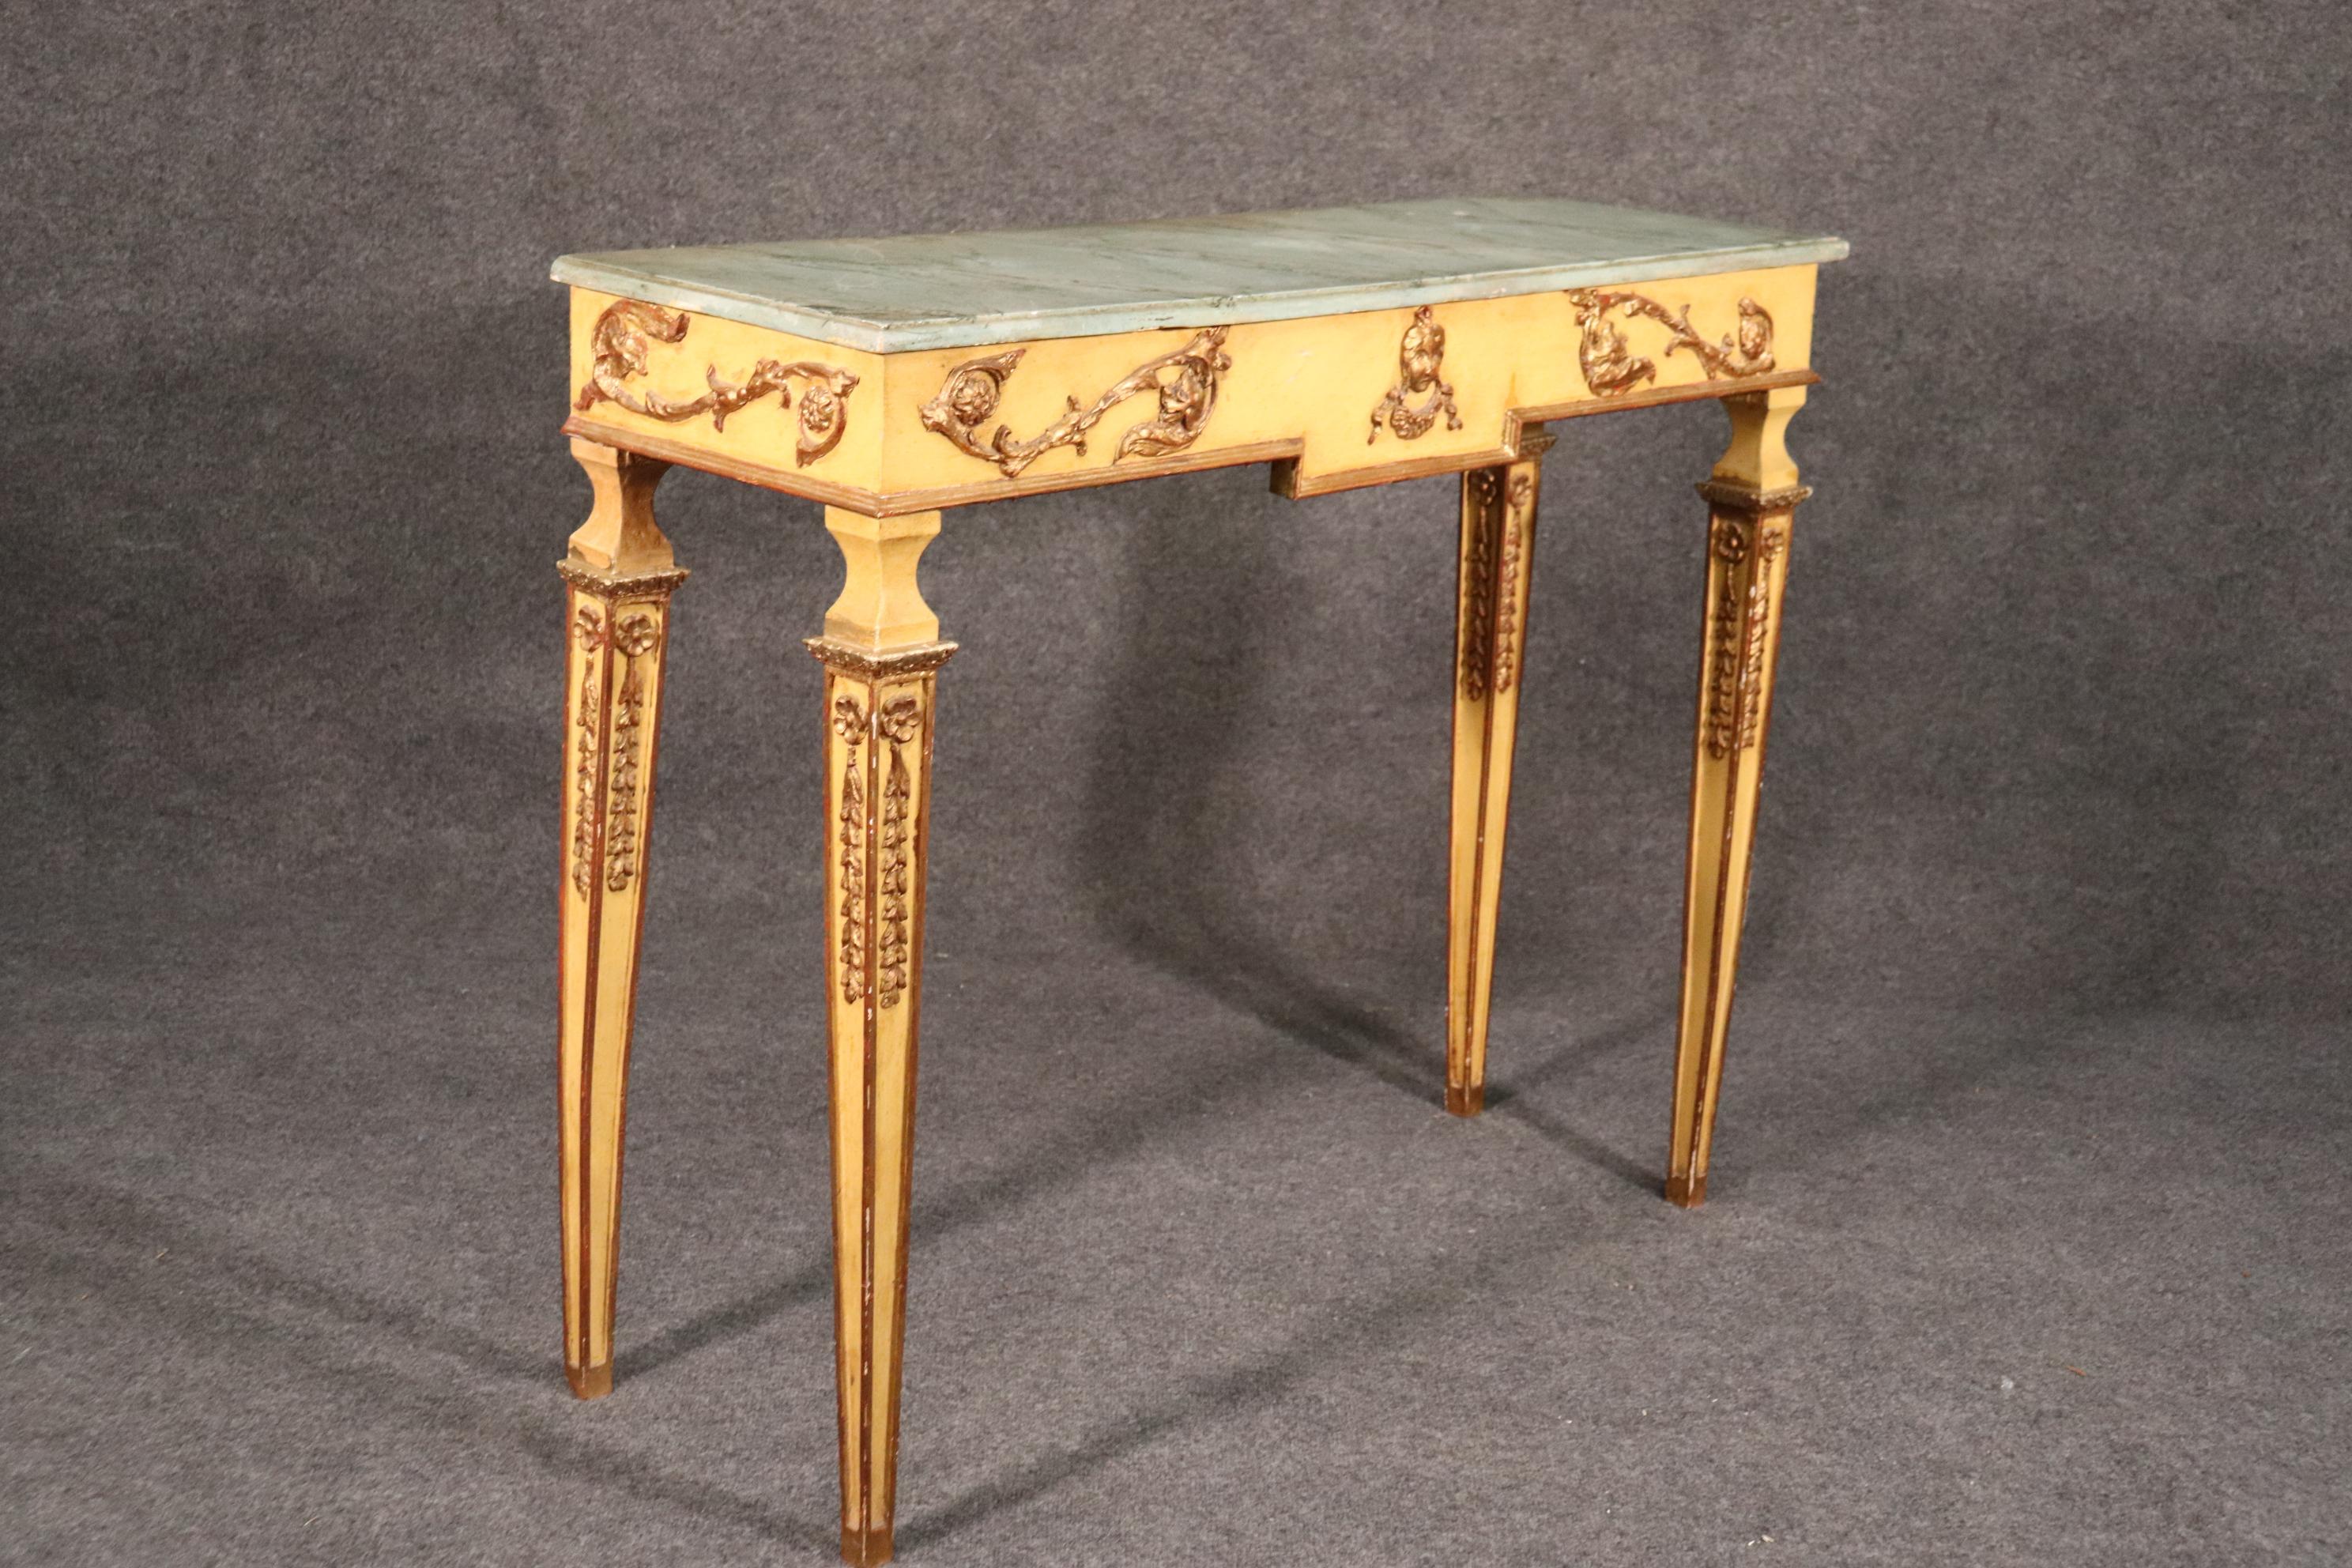 Regency Revival Faux Marble Paint Decorated French Regency Console Table in Creme Paint and Gilt For Sale